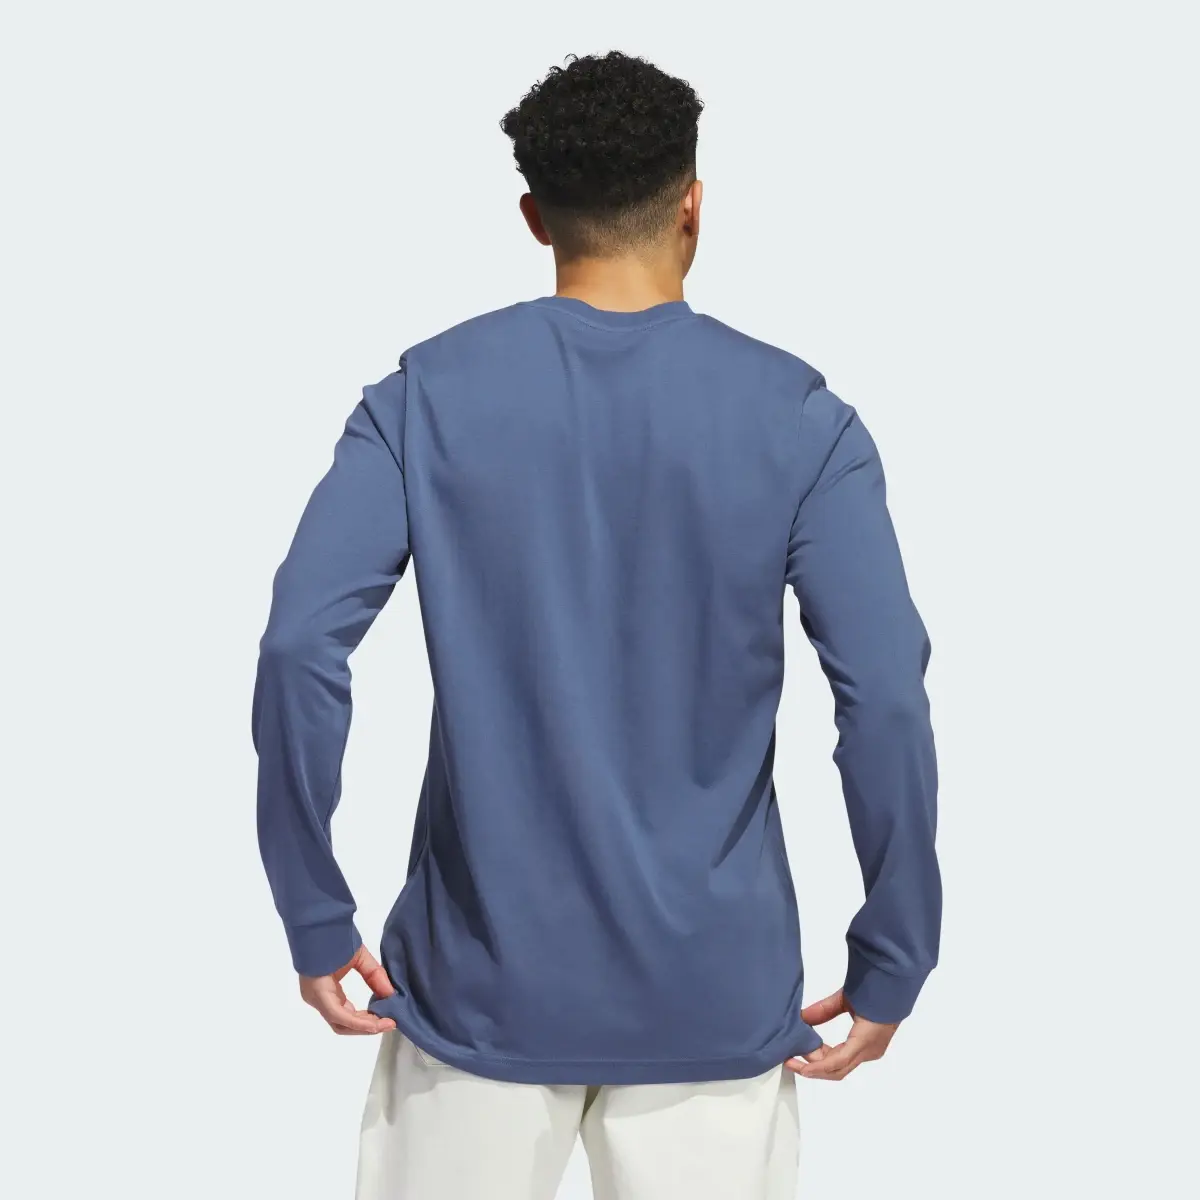 Adidas Go-To Crest Graphic Long Sleeve T-Shirt. 3